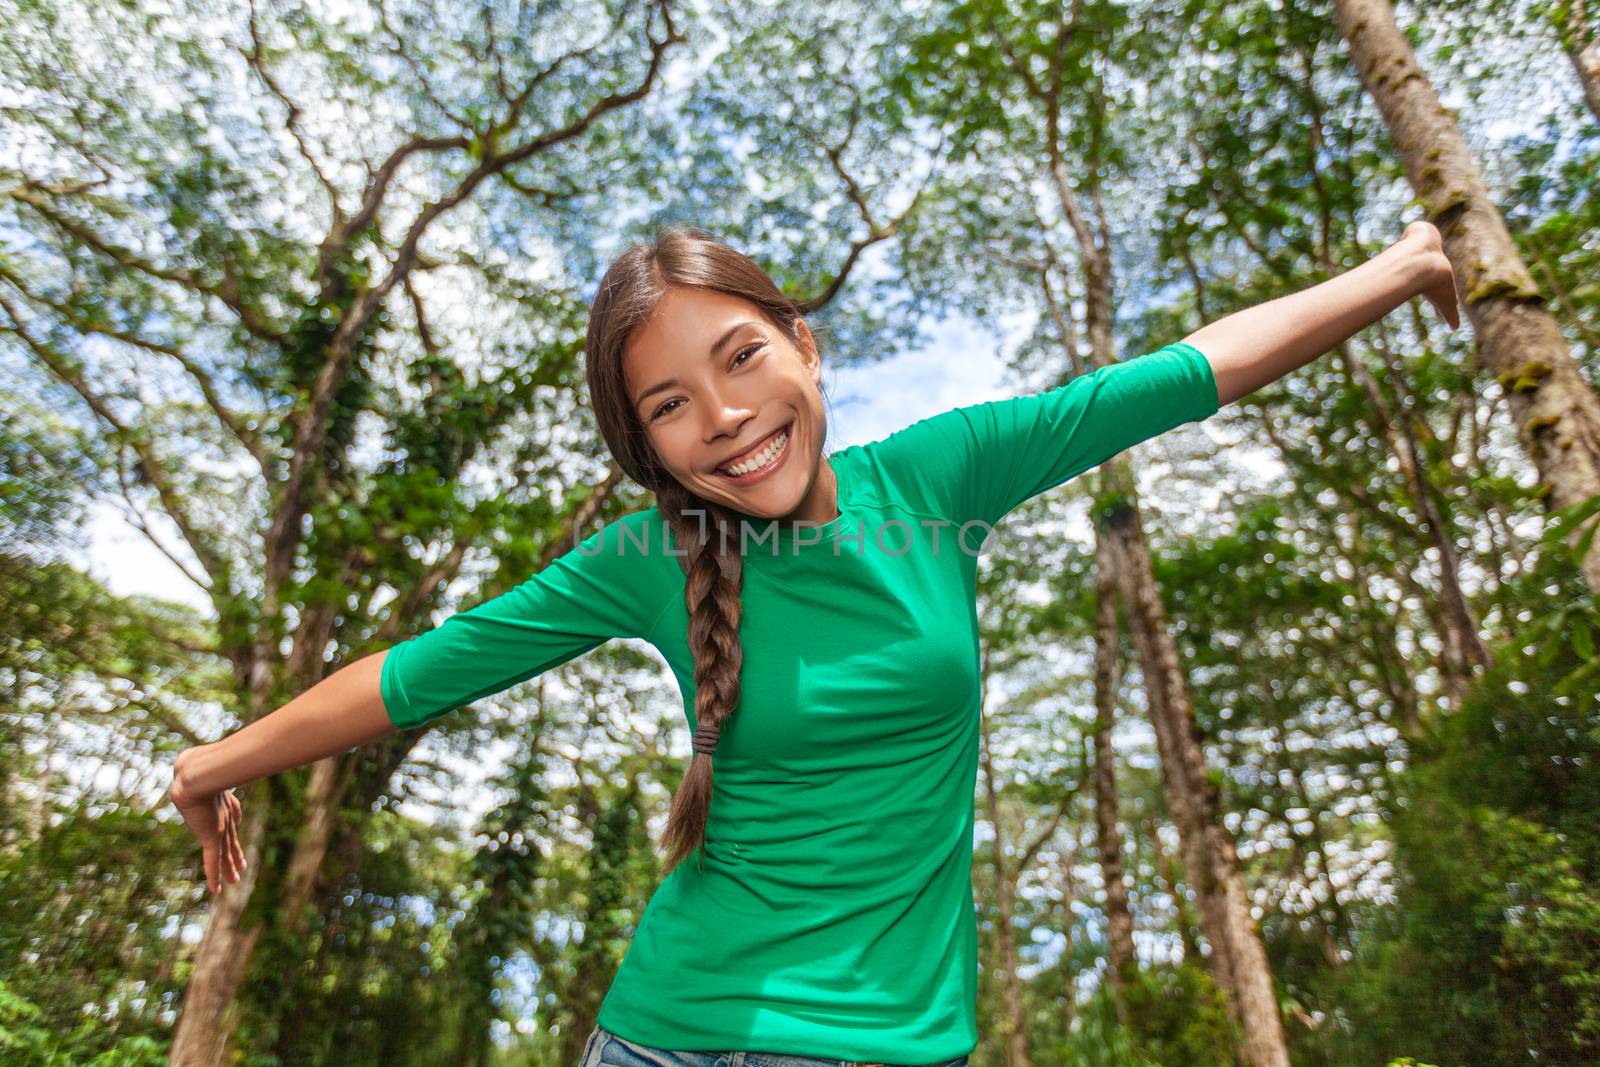 Environment friendly happy girl enjoying nature forest outdoors in natural sunny background. Asian woman with open arms in freedom having fun in fresh air, tall green trees.